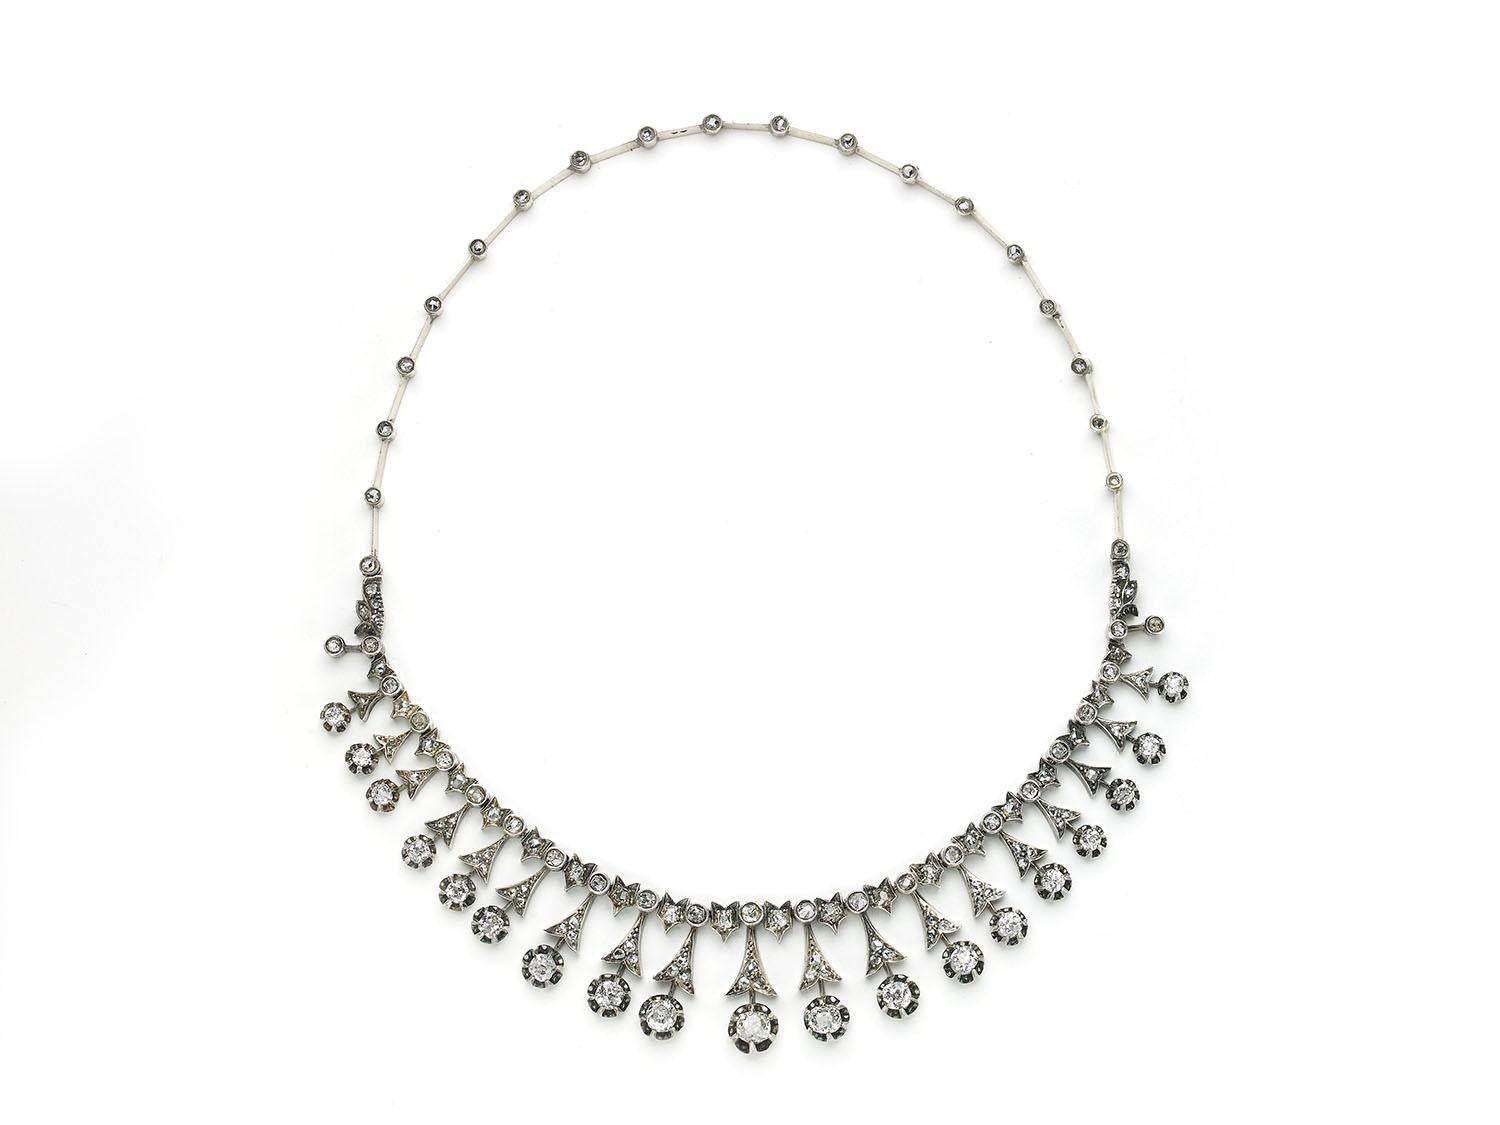 An antique diamond tiara / necklace, set with old-cut and rose-cut diamonds, with a row of alternating old-cut diamonds, in rub over settings and old-cut diamonds in grain set chevrons. The rub over set diamonds surmount fan shaped mounts, each set